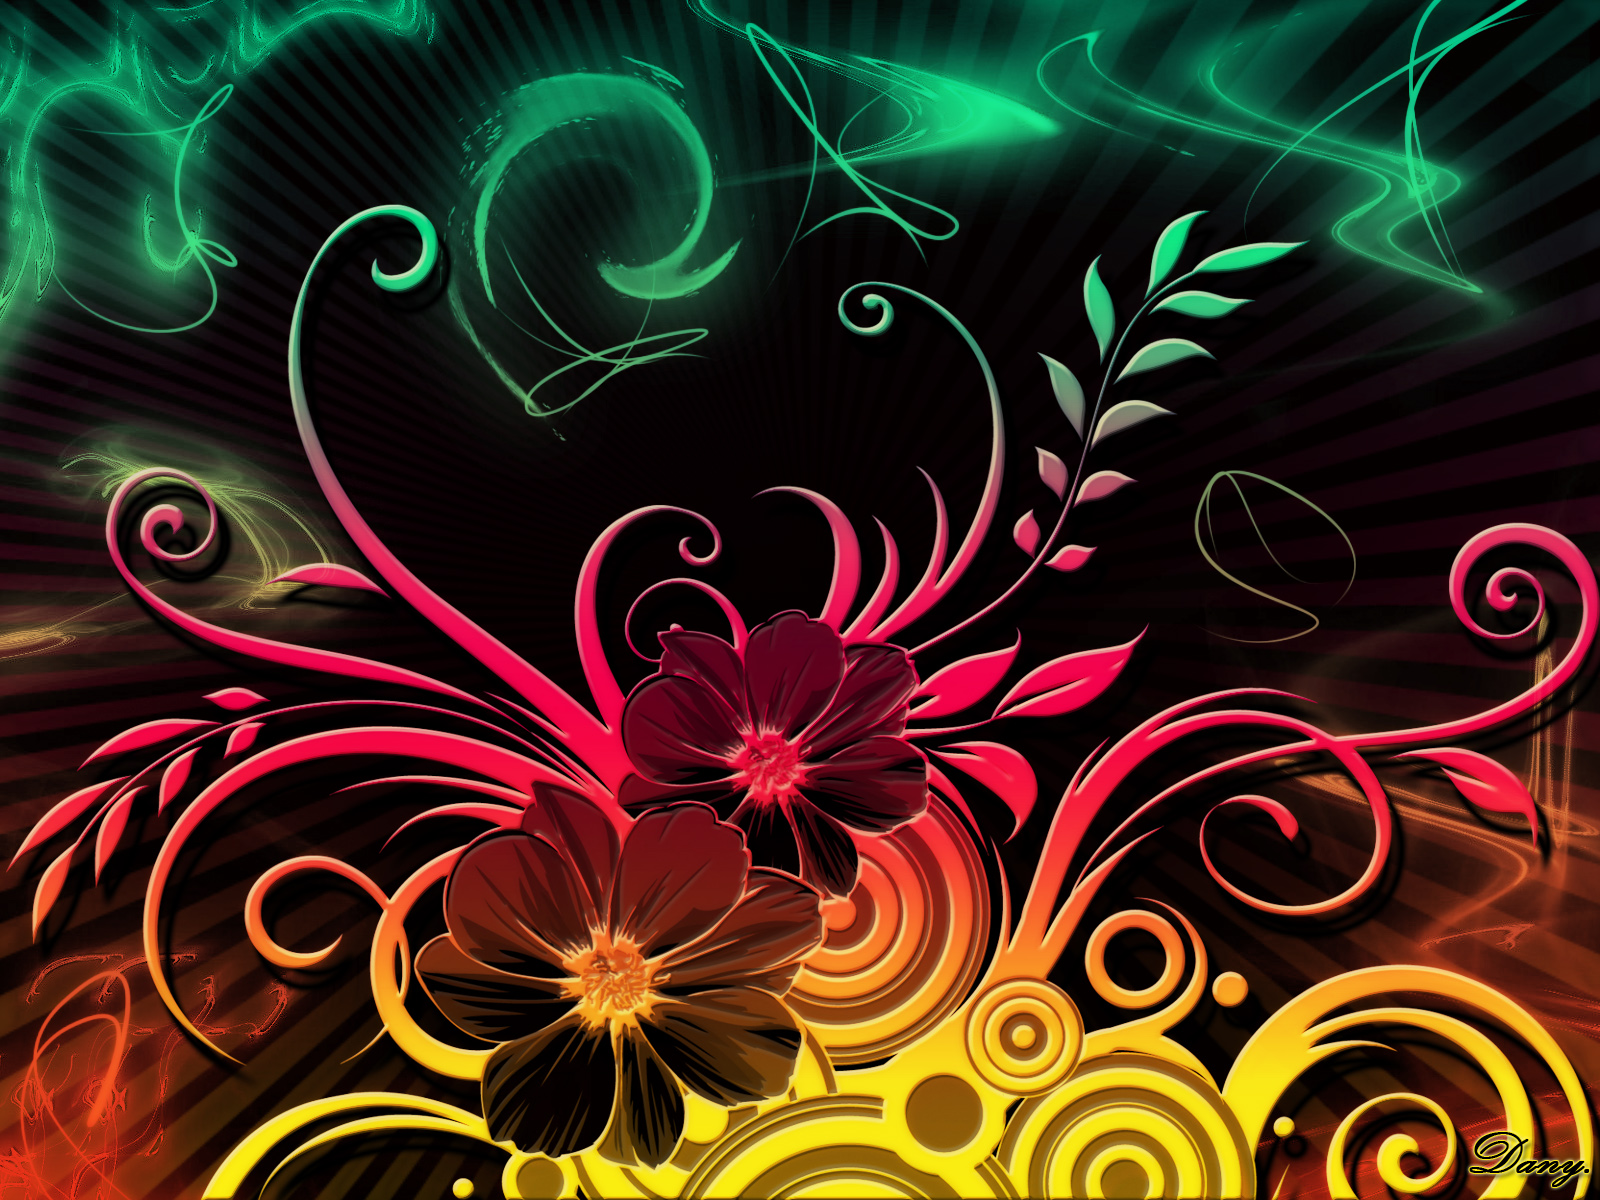 Get free colorful backgrounds for your desktop and give it a more